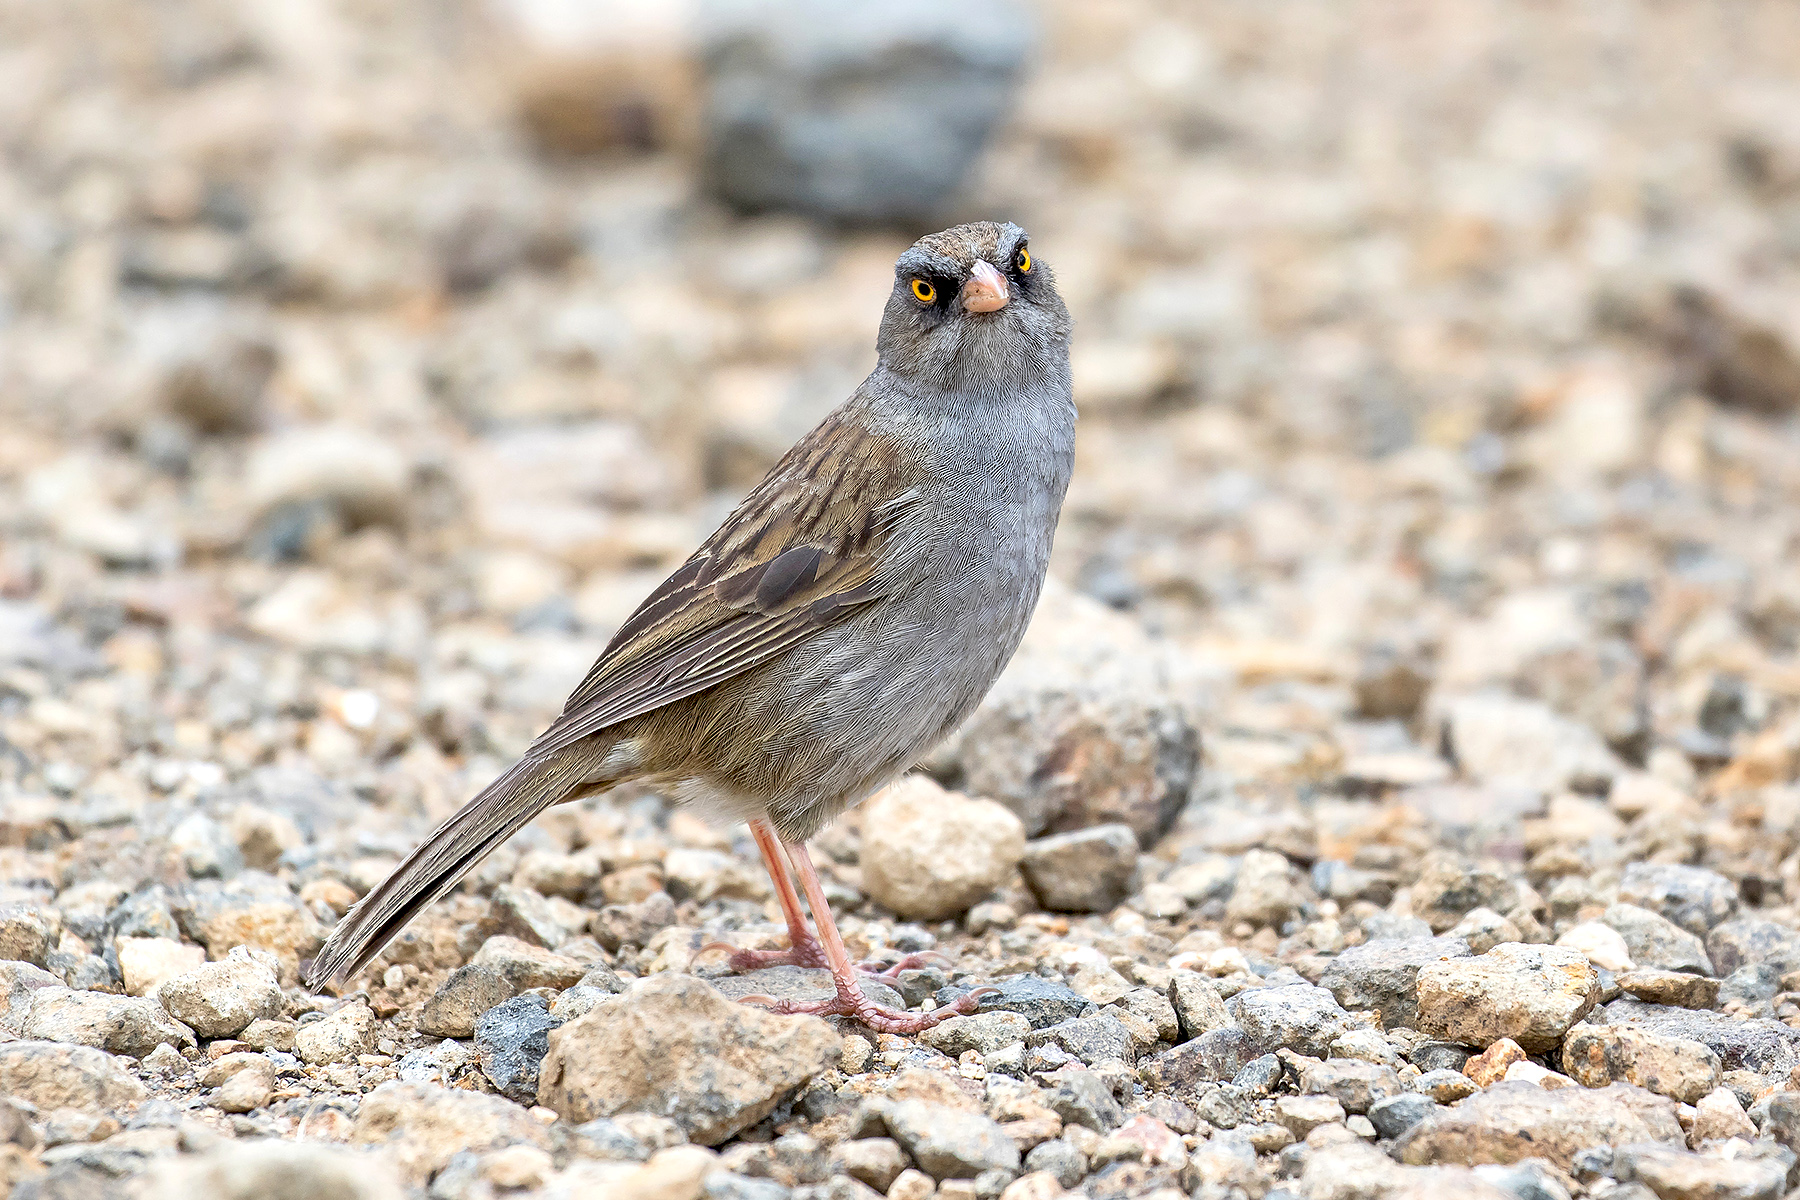 Volcano Junco on our Costa Rica birding tour (image by Pete Morris)